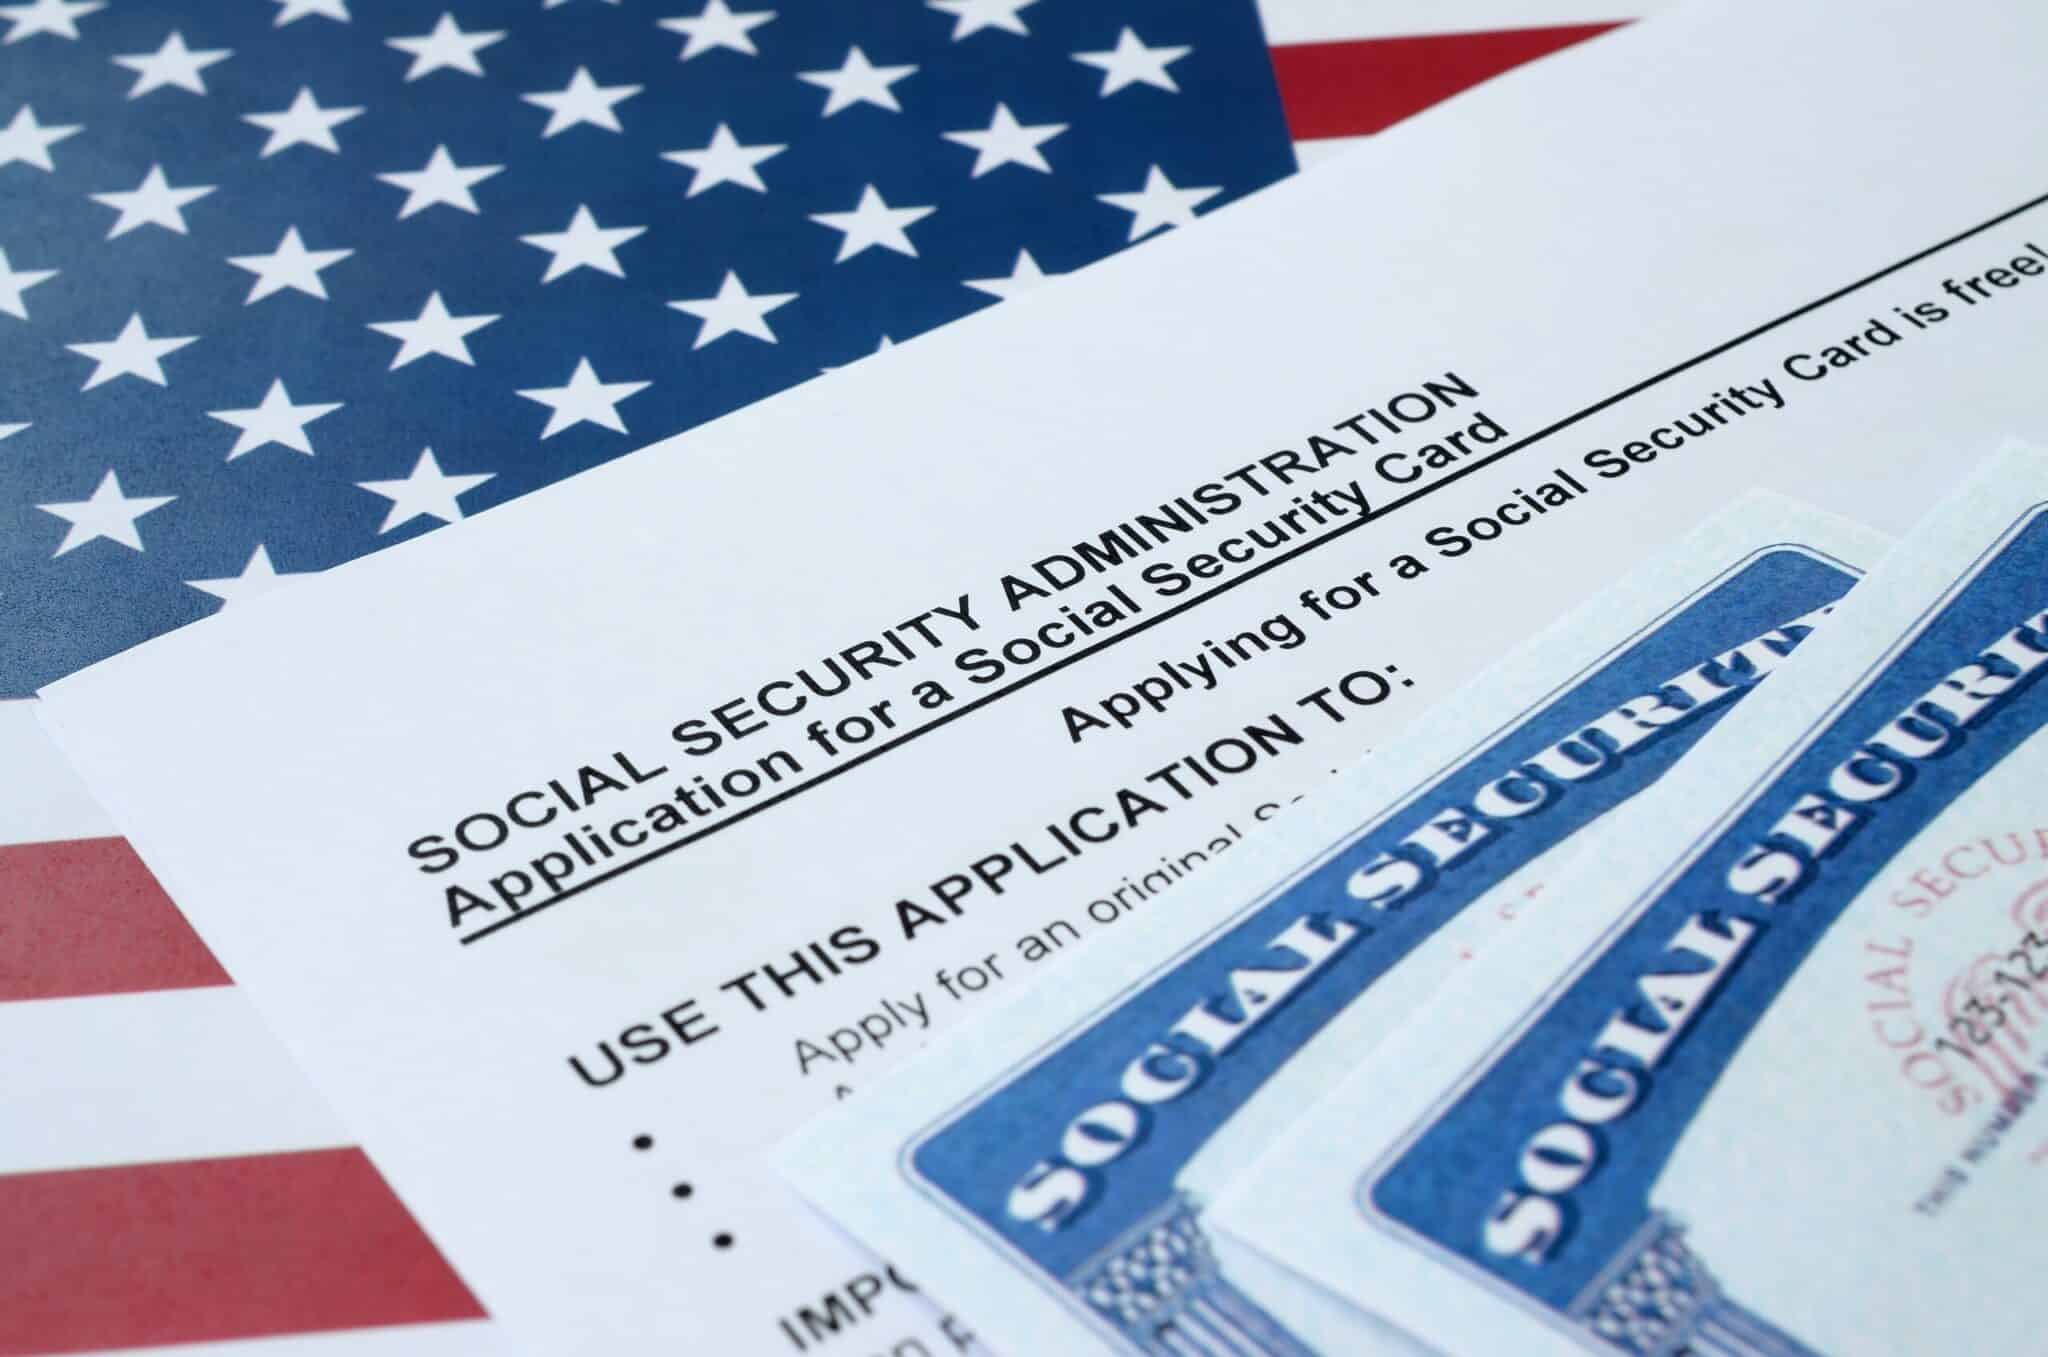 united states social security number cards lies on 2022 08 01 04 39 25 utc scaled